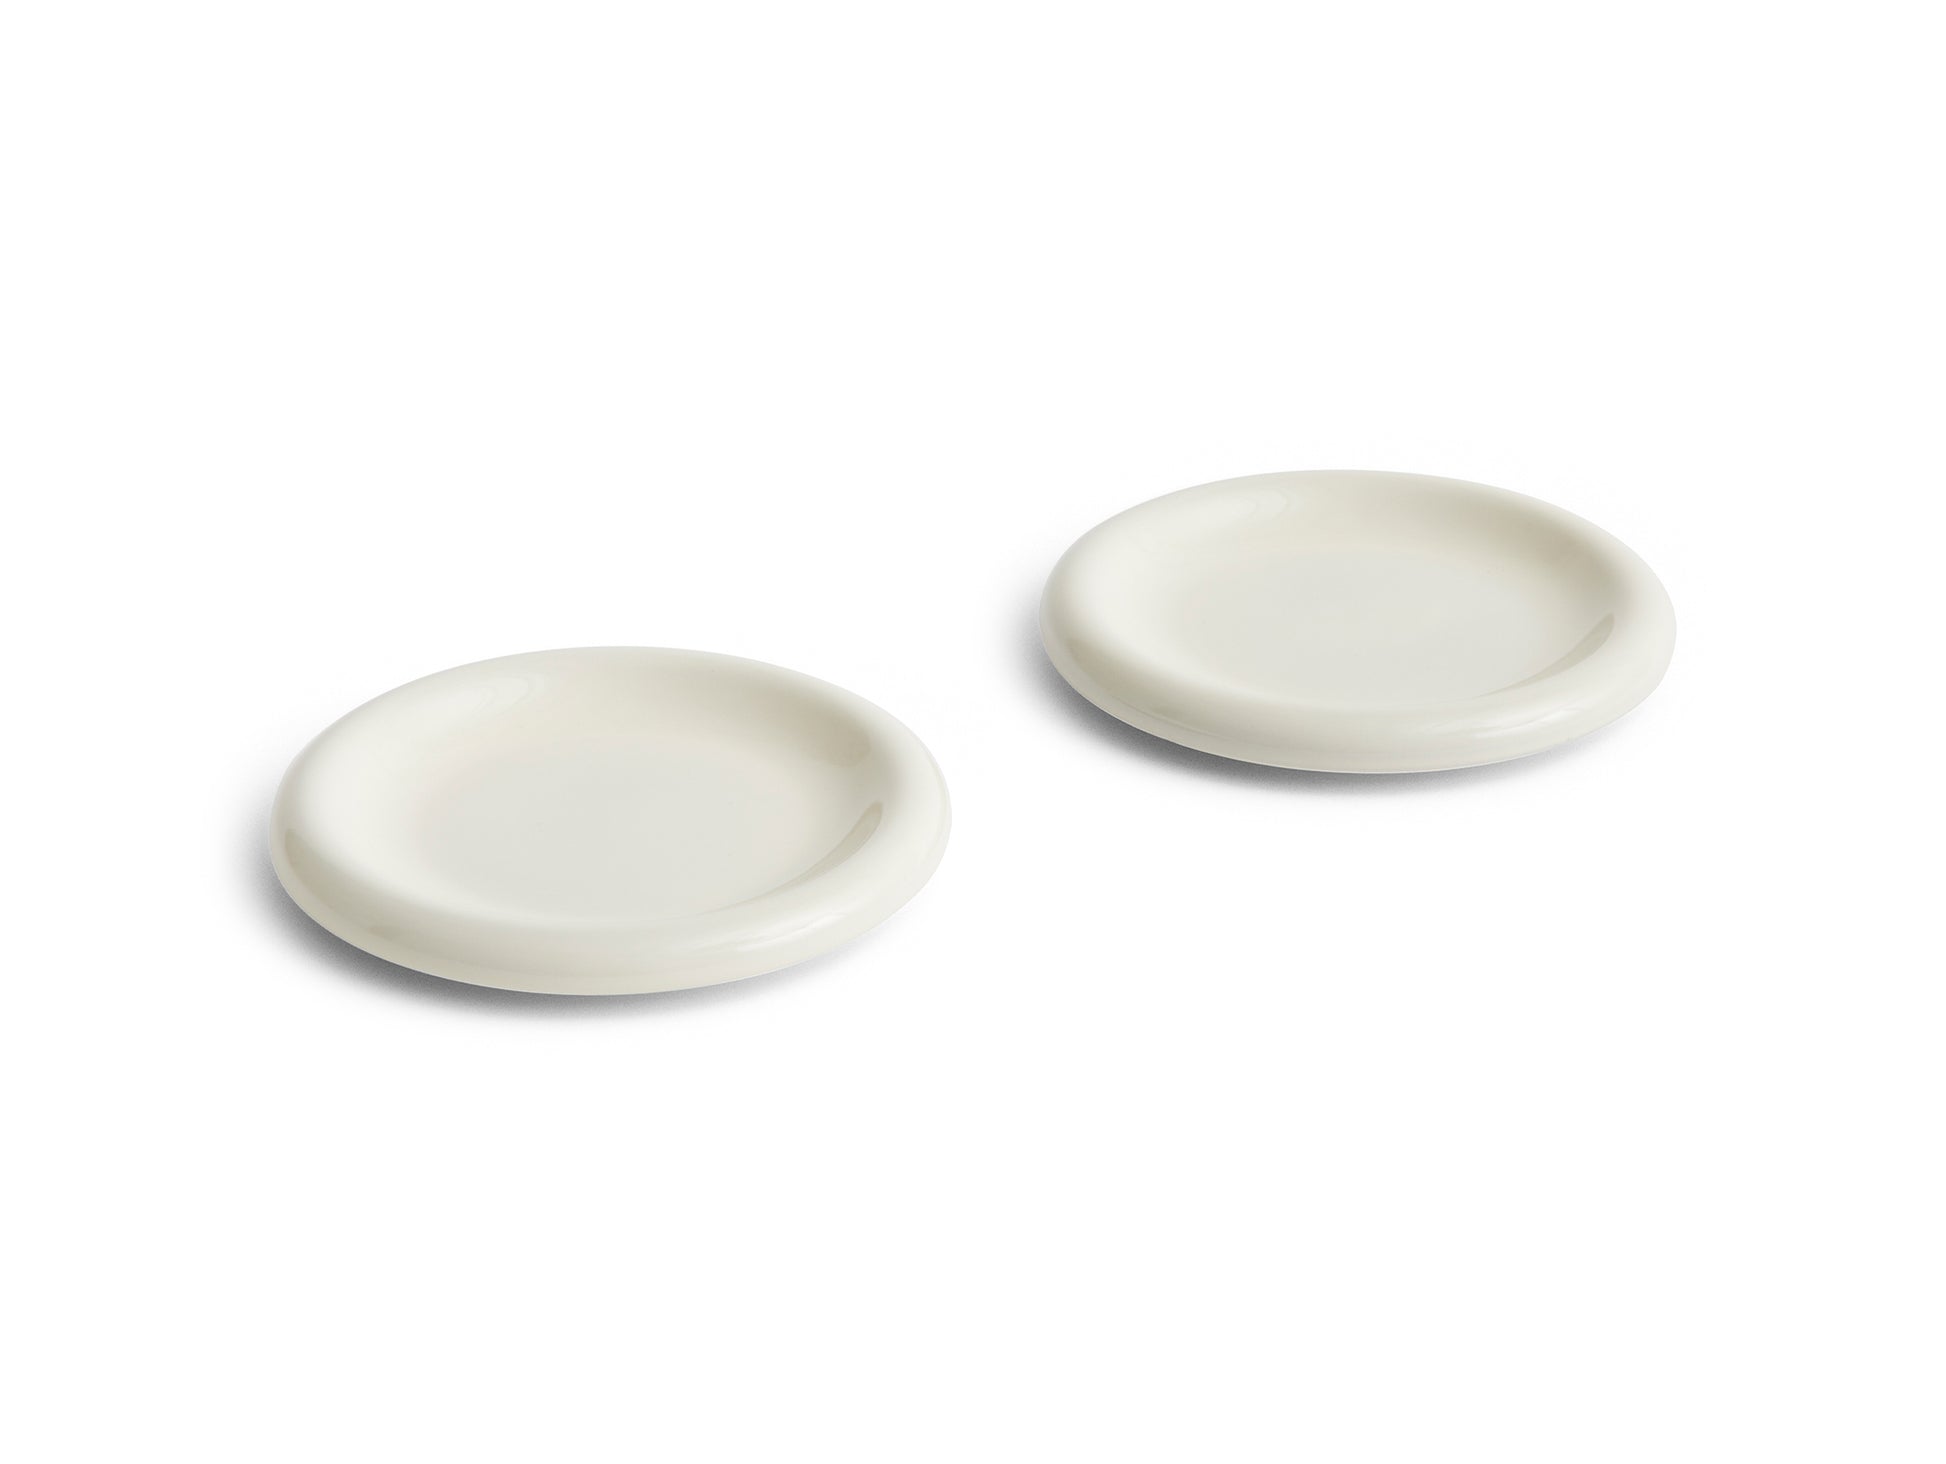 Barro Plate - Set of 2 by HAY - D 18 cm / Off White